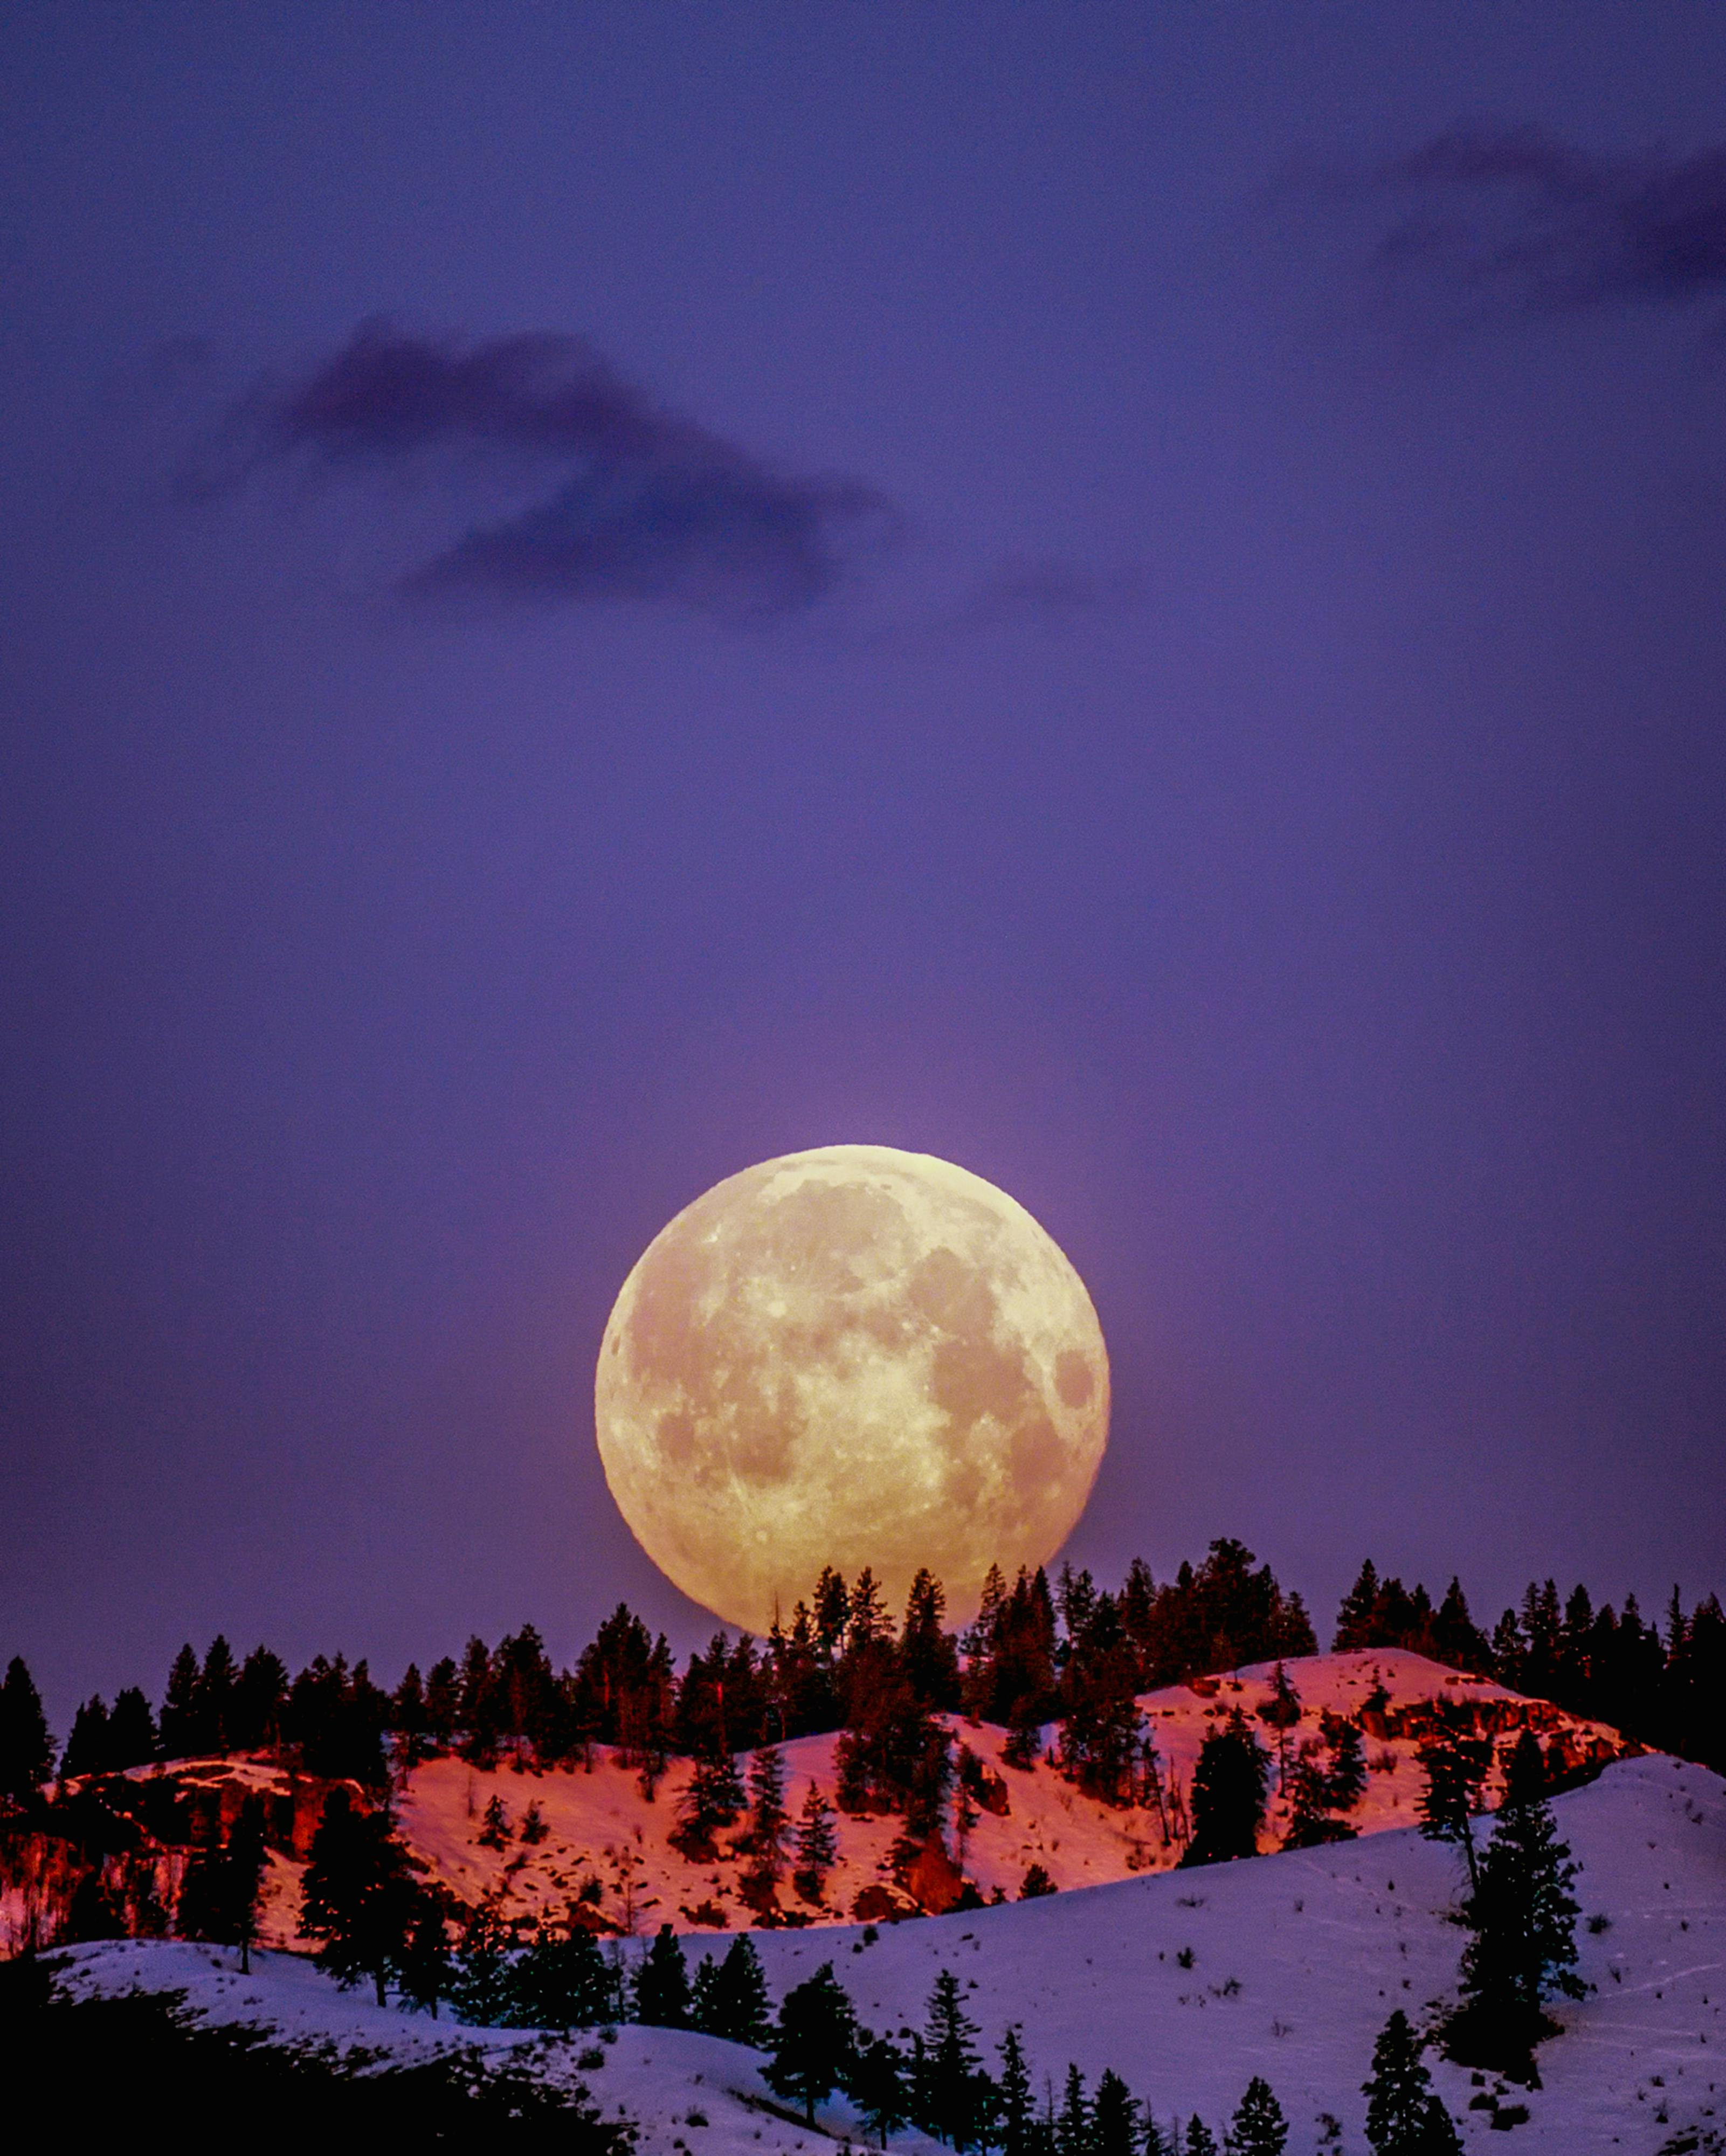 Moon over snowcapped mountain. | Photo: Pexels